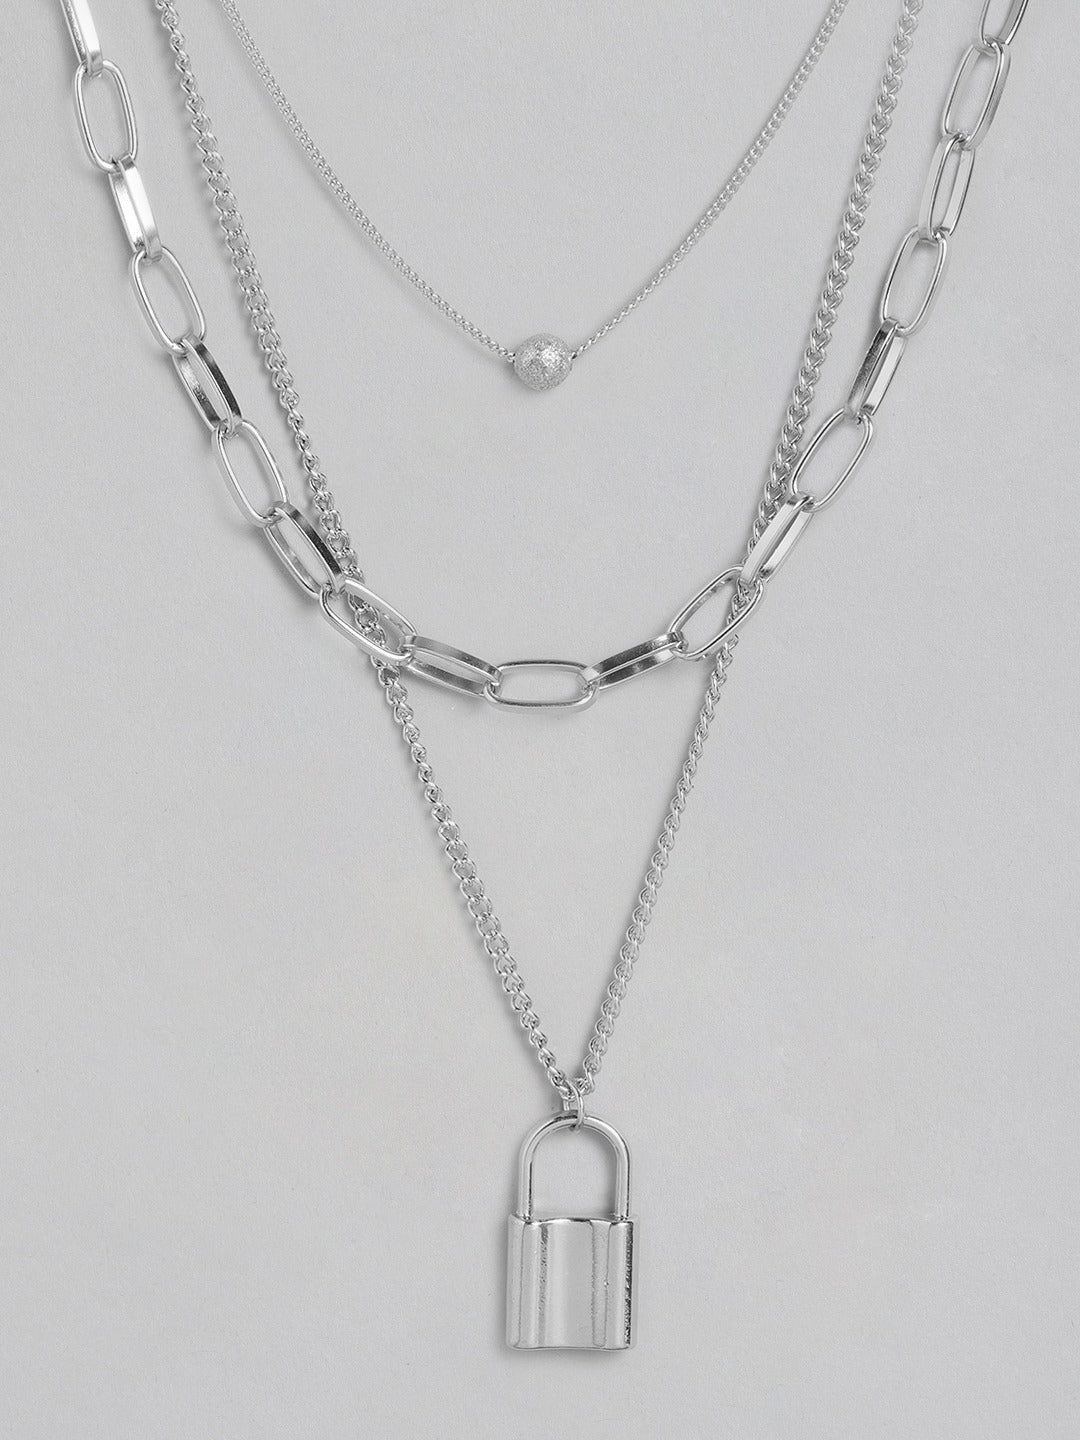 Blueberry silver chain layered pendant detailing necklace